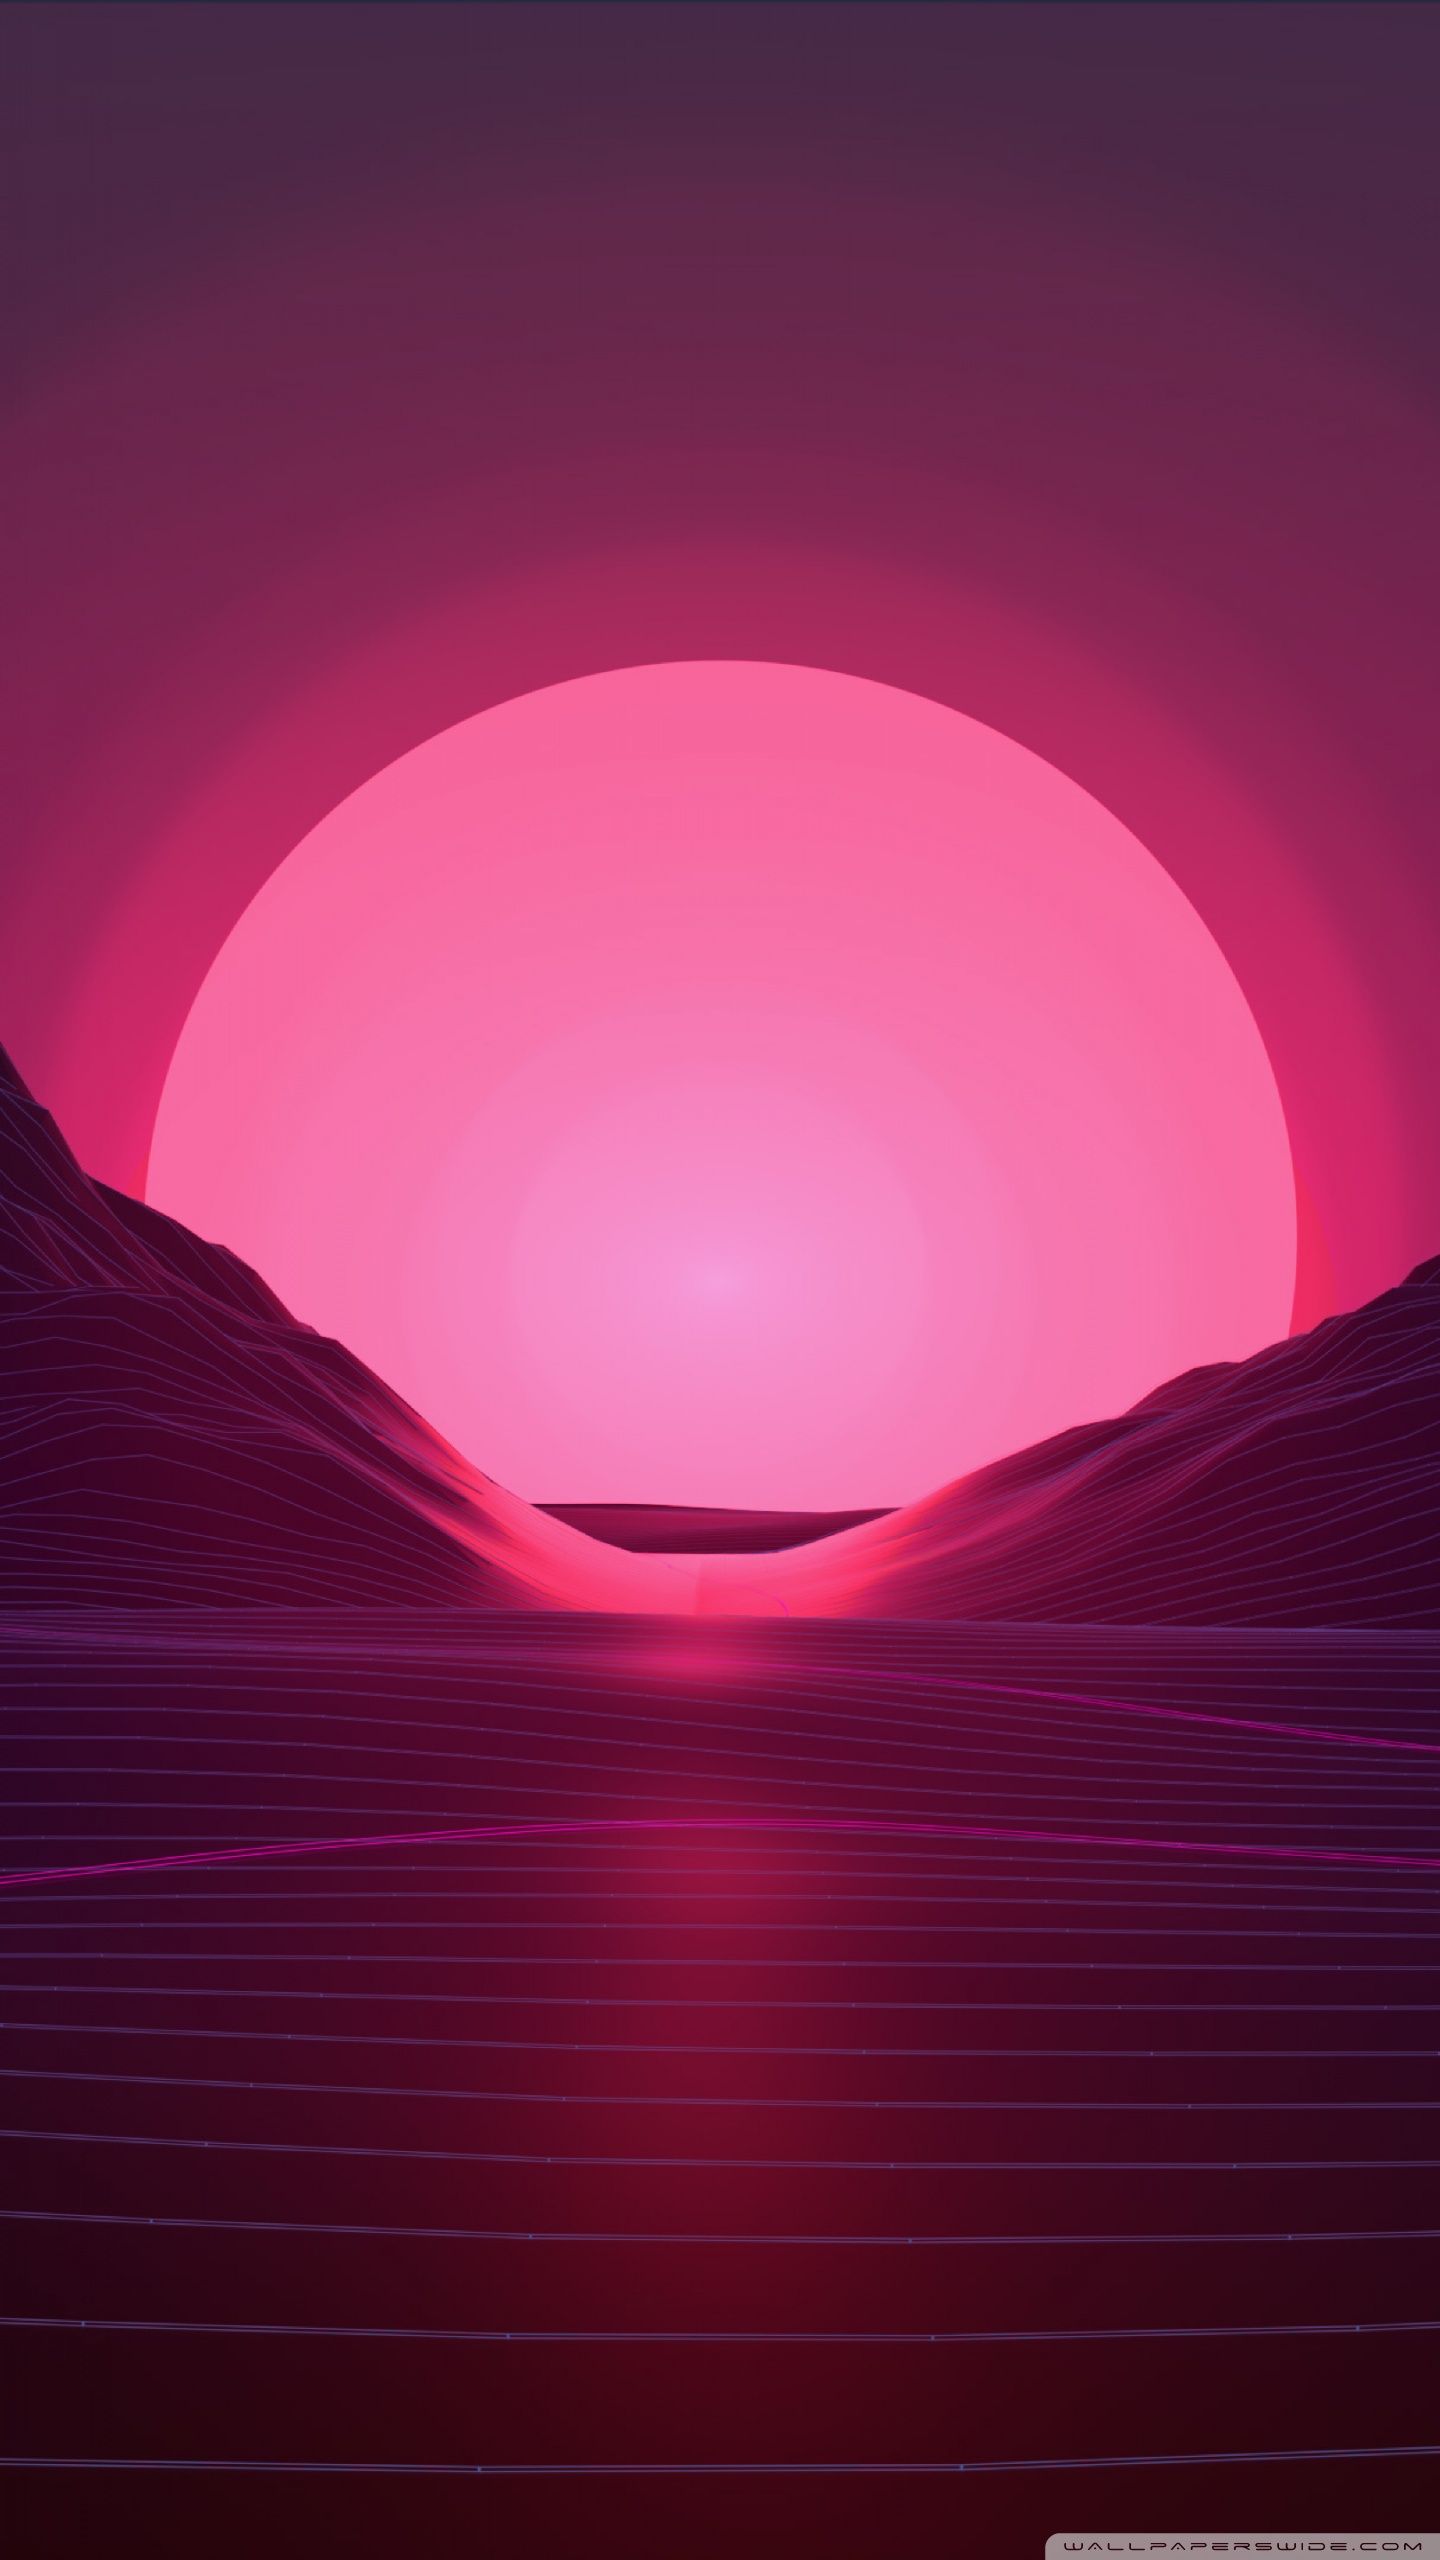 A sunset in the desert with mountains and hills - Synthwave